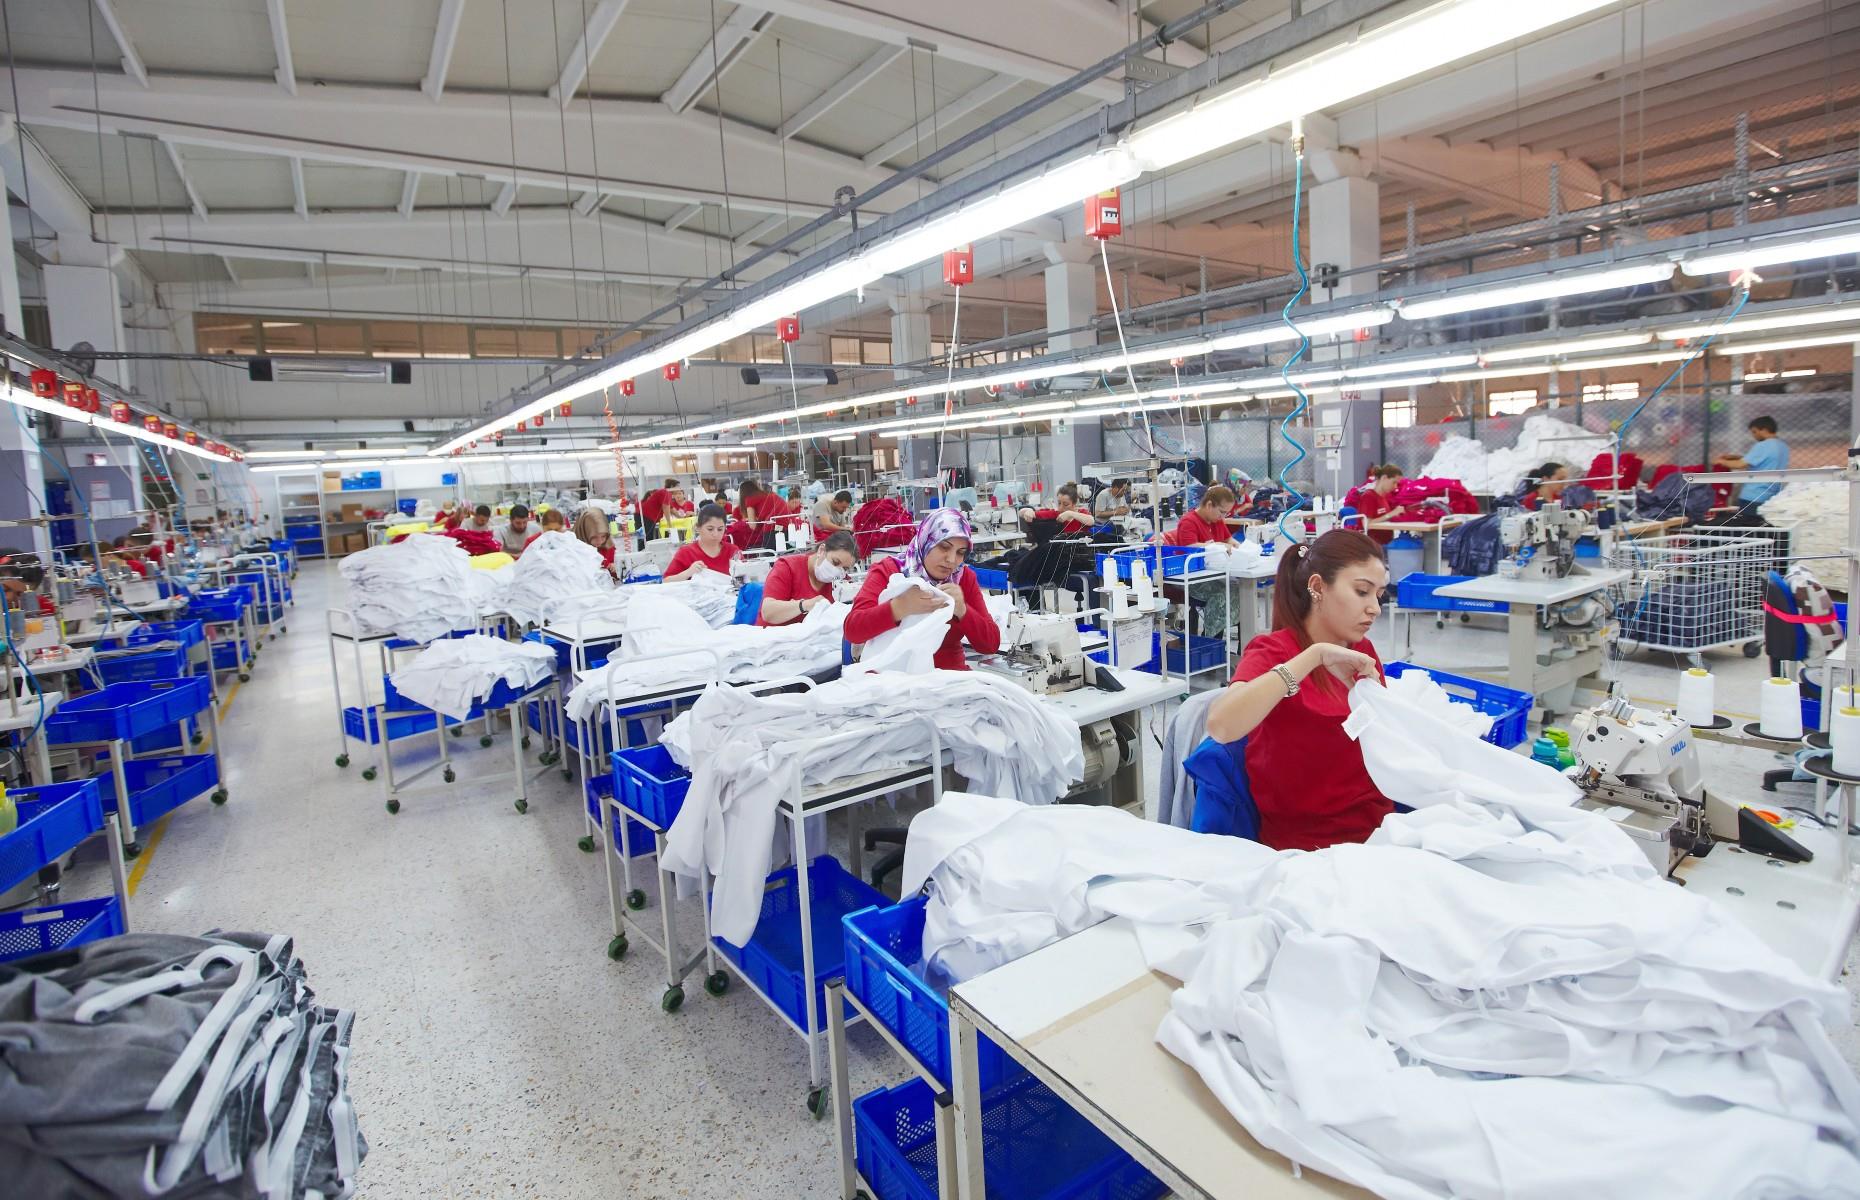 Textile workers